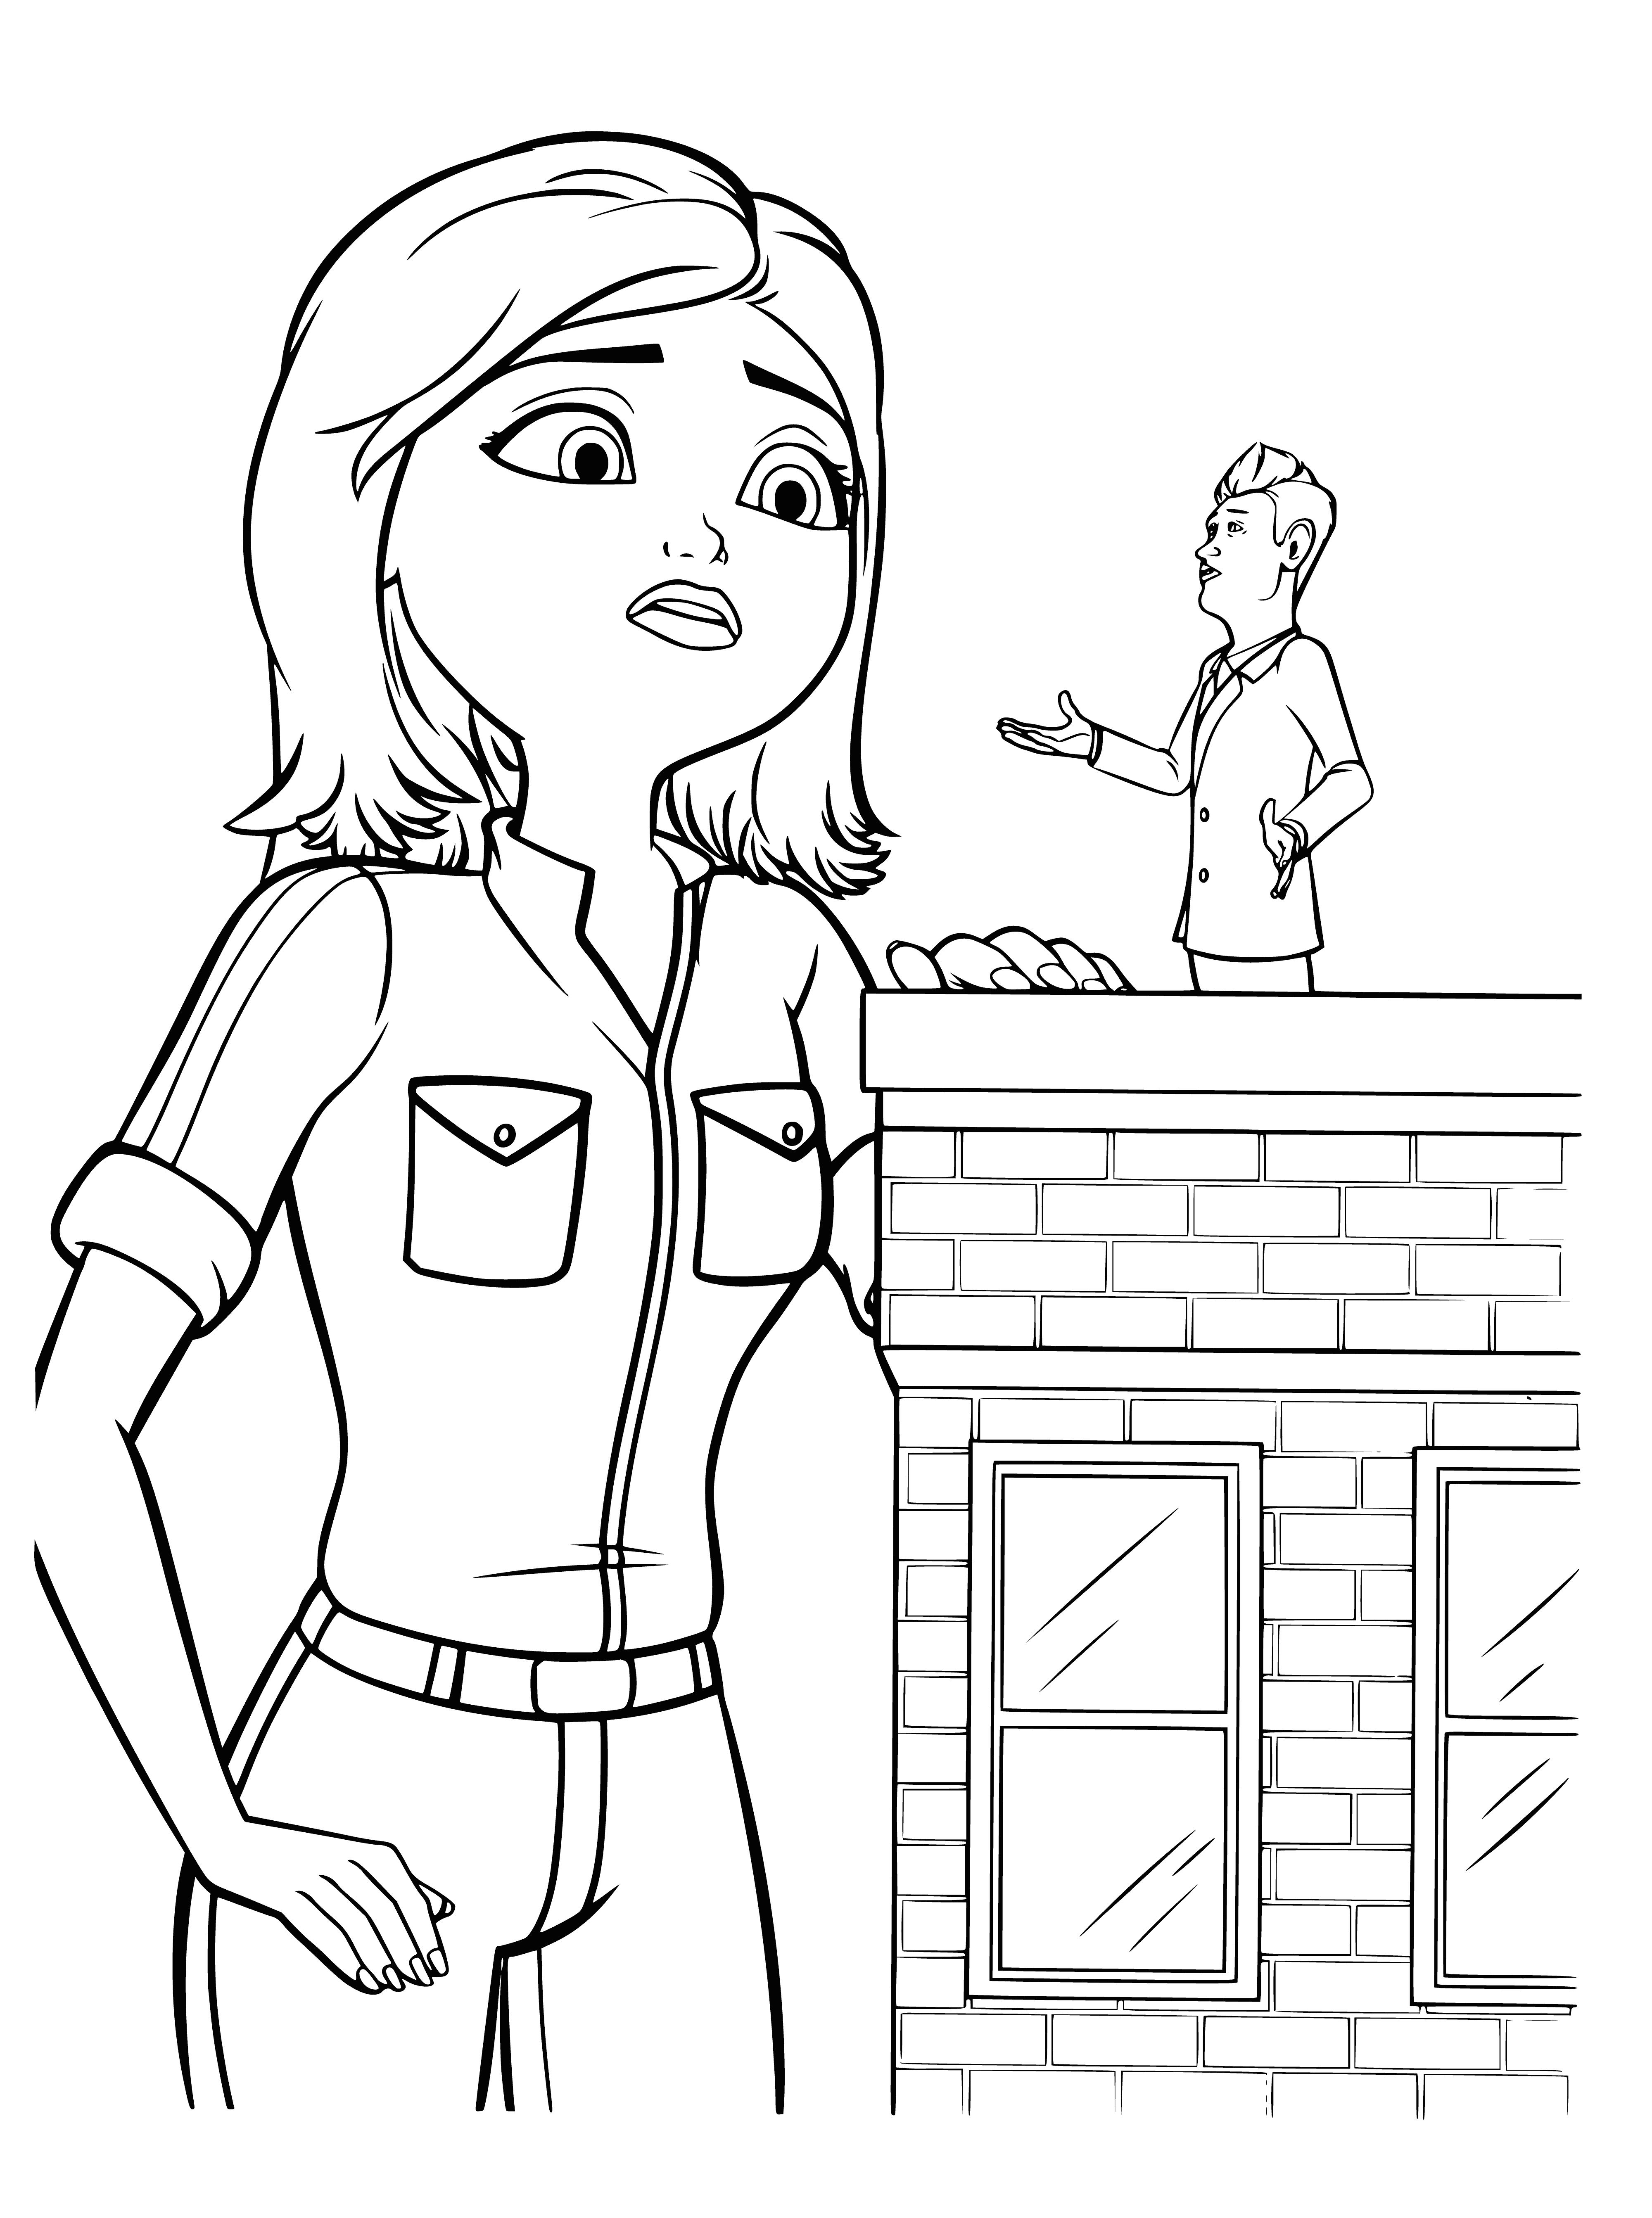 coloring page: Couple smiles, arm-in-arm, the woman in white and man in black, a tiger observing their love.